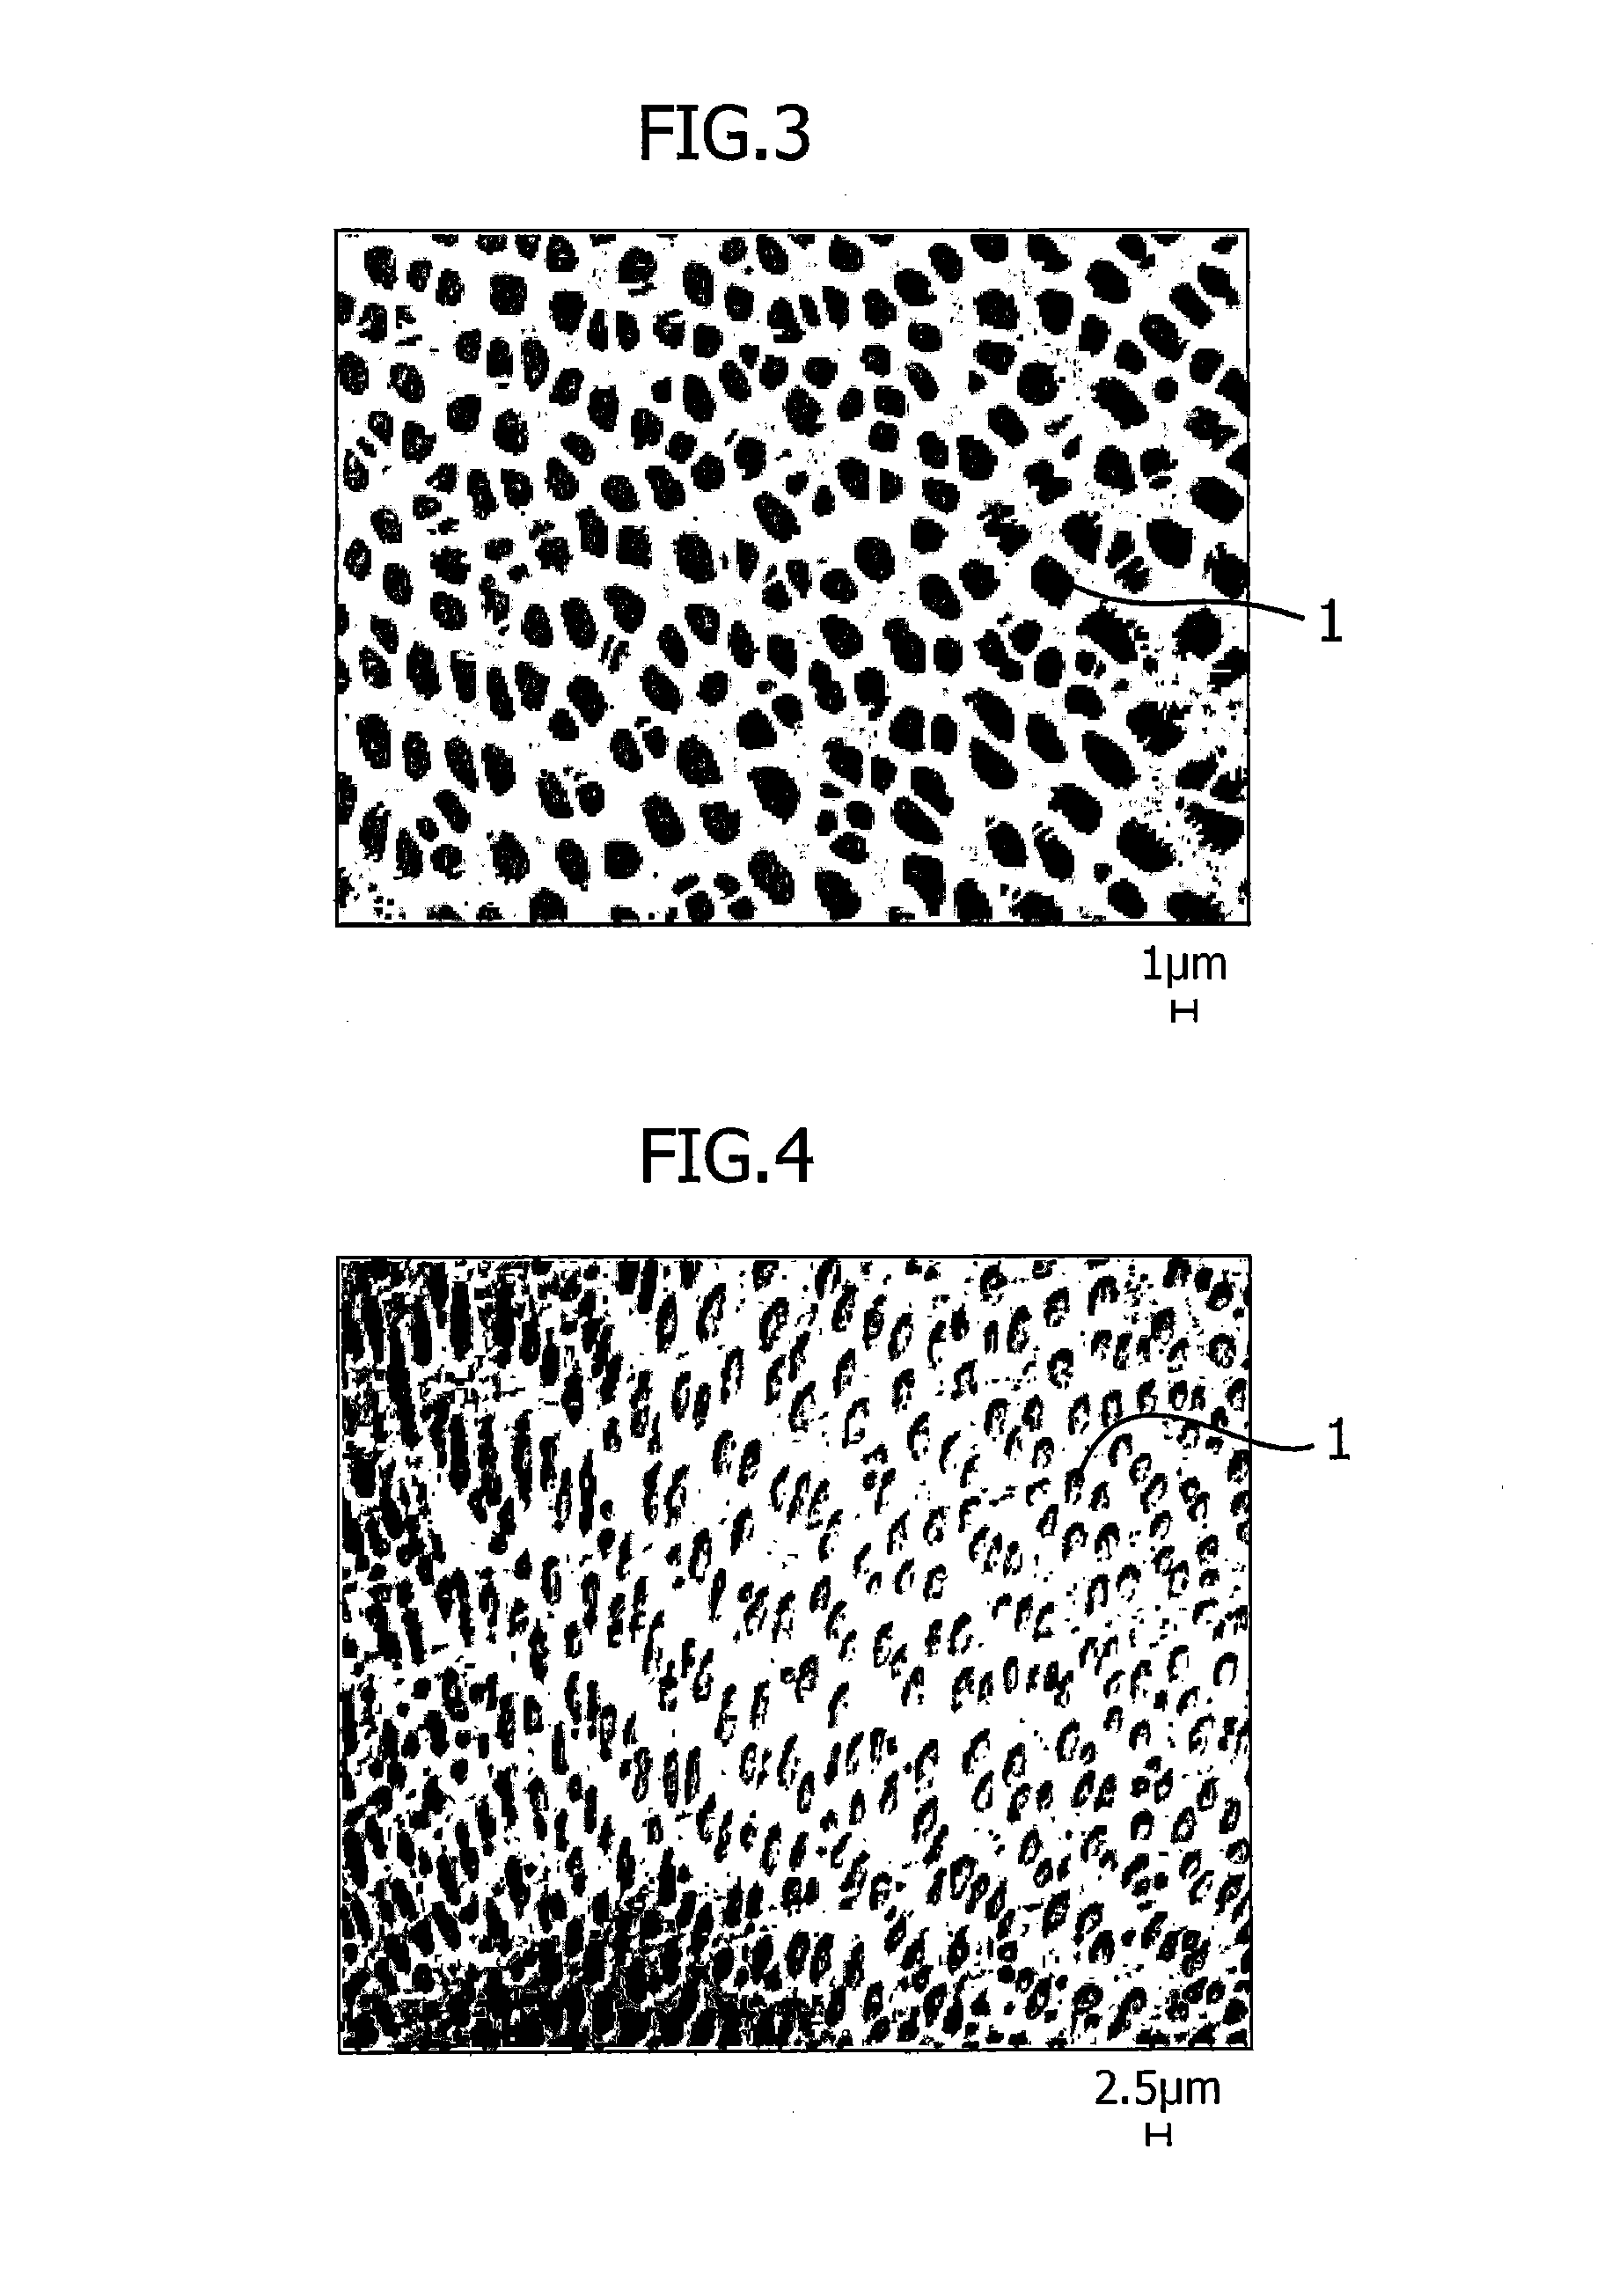 Ni-BASED HEAT-RESISTANT SUPERALLOY AND METHOD FOR PRODUCING THE SAME